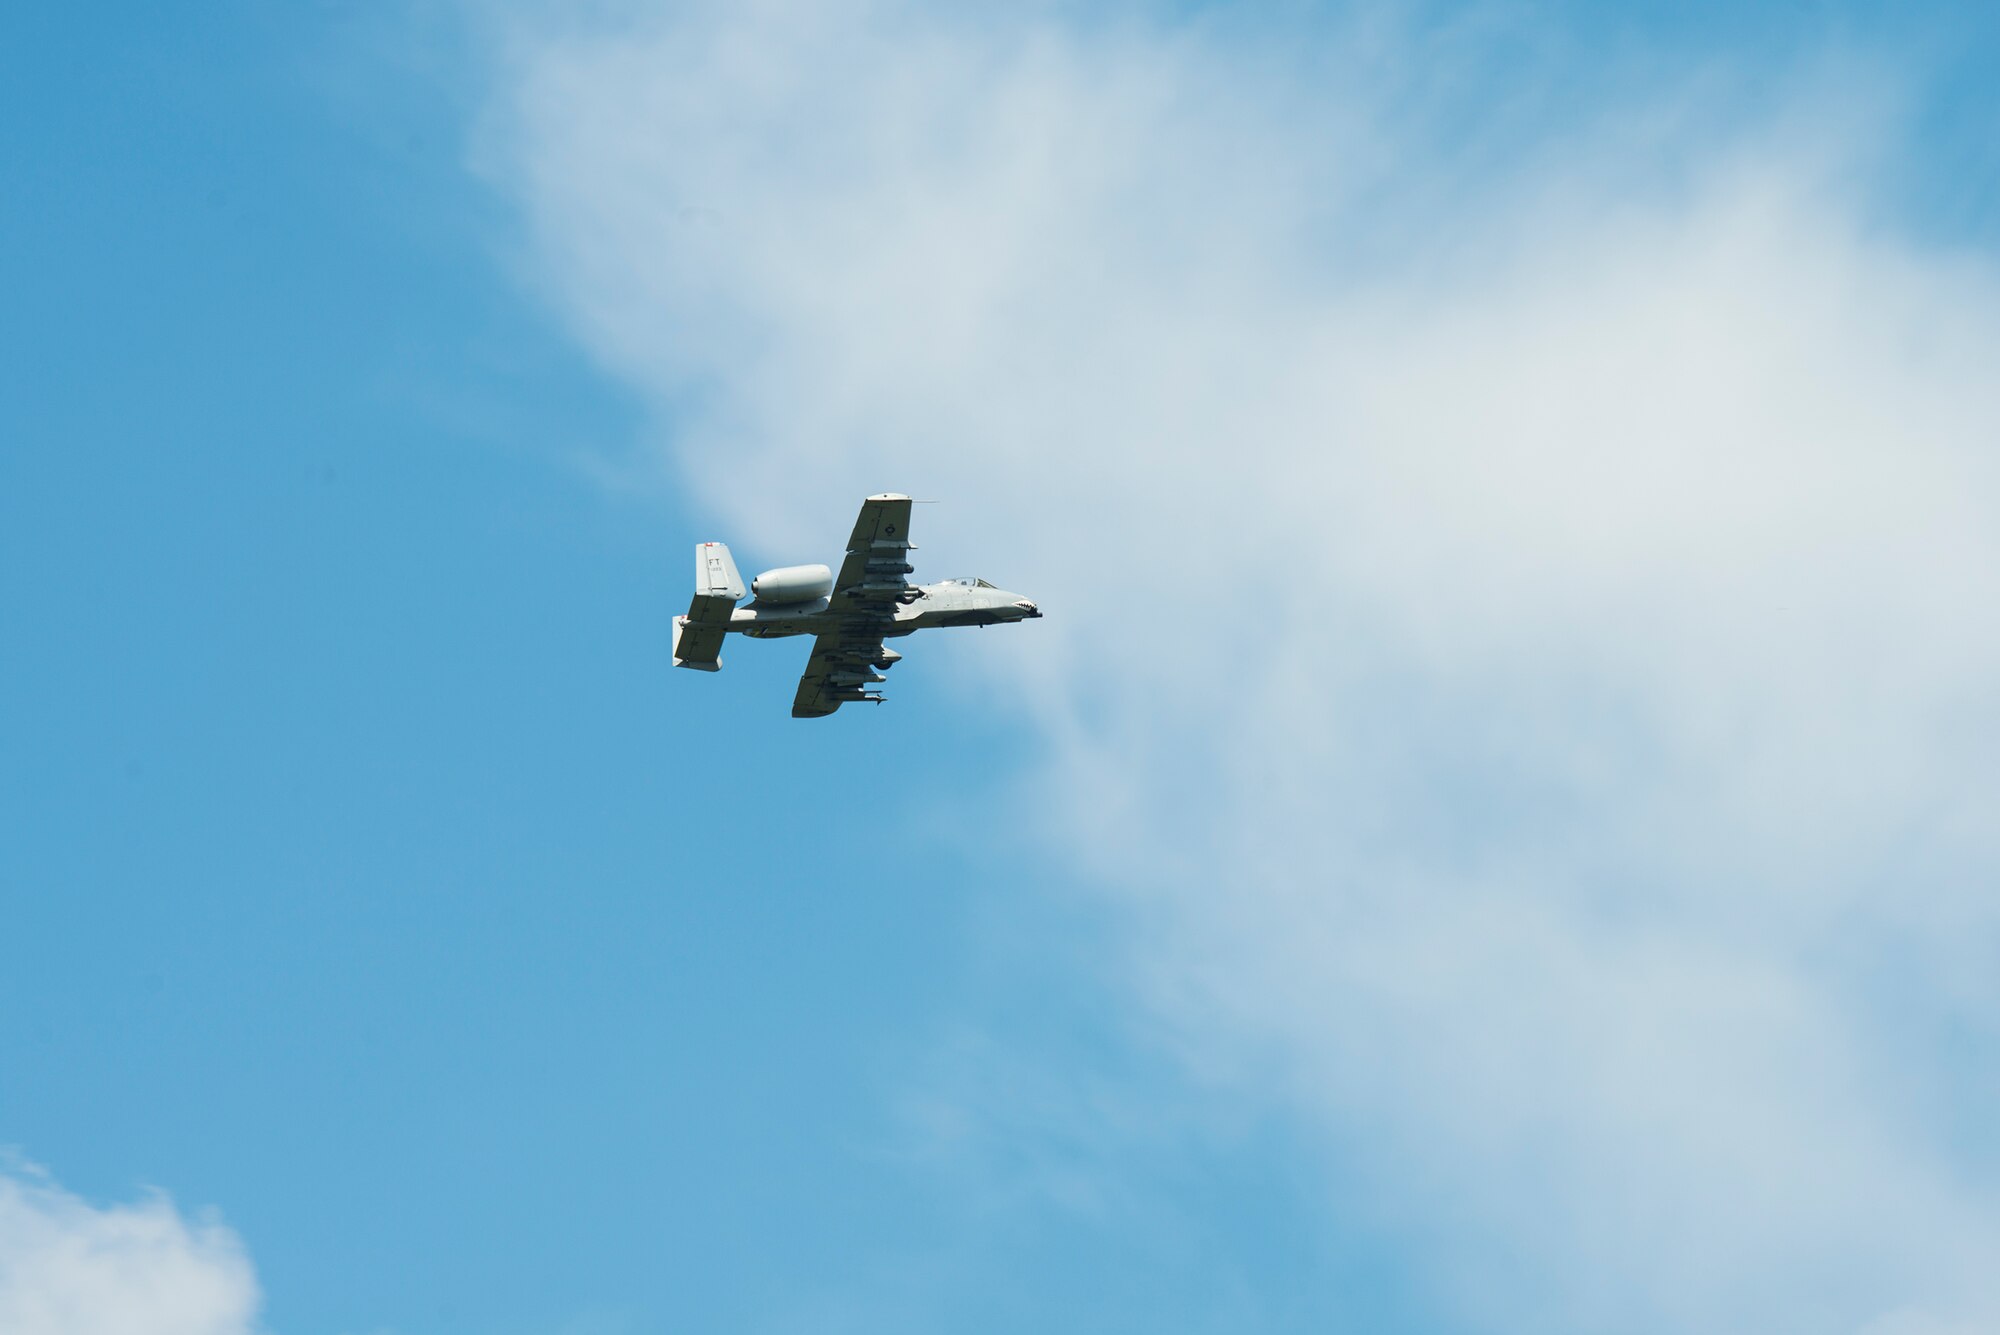 An A-10C Thunderbolt II from the 74th Fighter Squadron maneuvers after performing a strafing run during a joint training with the 7th Air Support Operations Squadron June 18, 2015, on Grand Bay Bombing and Gunnery Range at Moody Air Force Base, Ga. During the training, the tactical air control party completed requirements necessary to become certified joint terminal attack controllers. (U.S. Air Force photo by Airman 1st Class Ceaira Tinsley/Released)